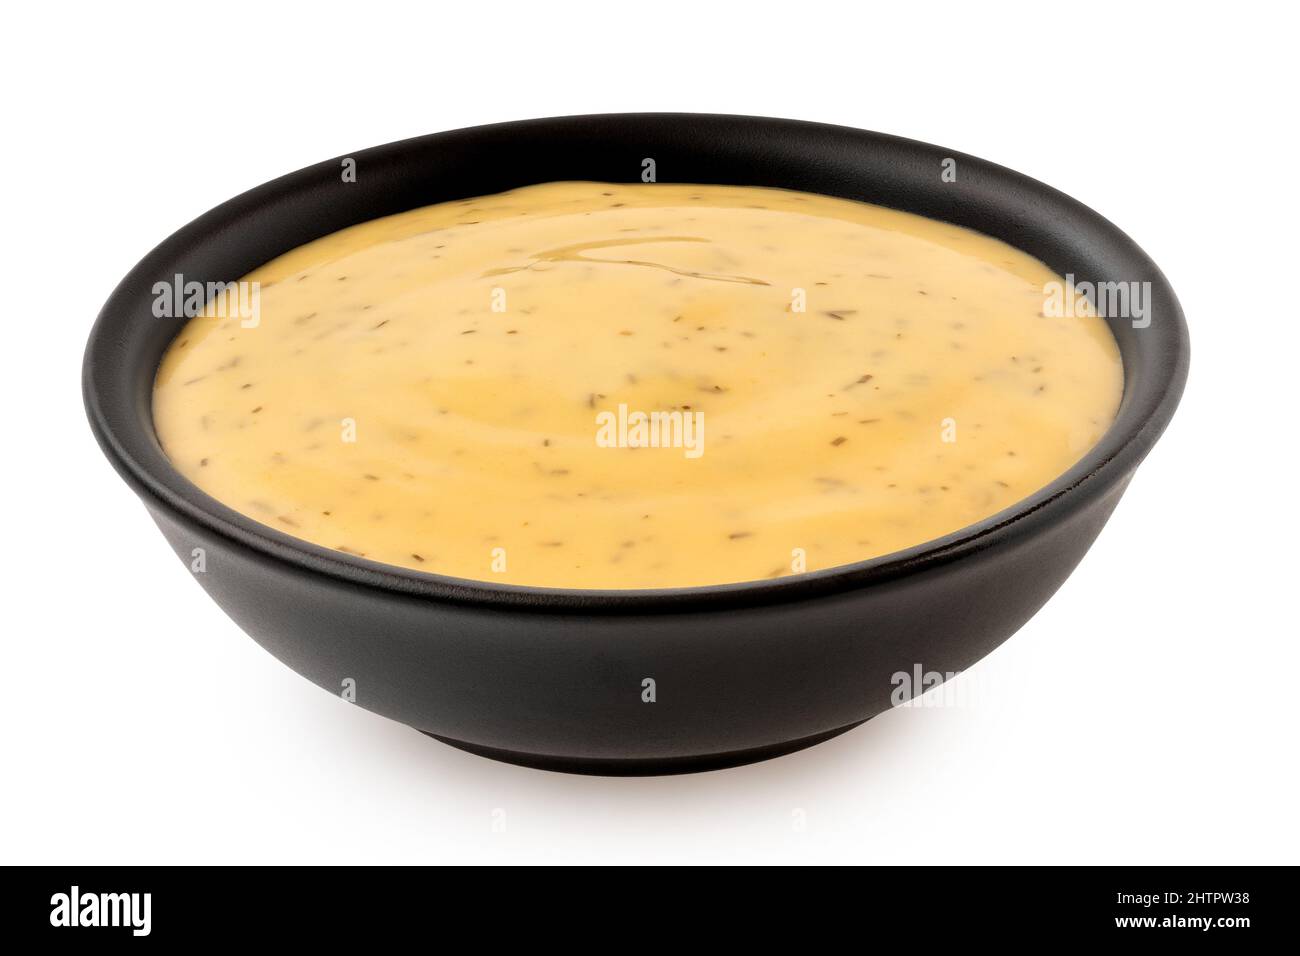 Honey and mustard sauce with dill in a black ceramic bowl isolated on white. Stock Photo